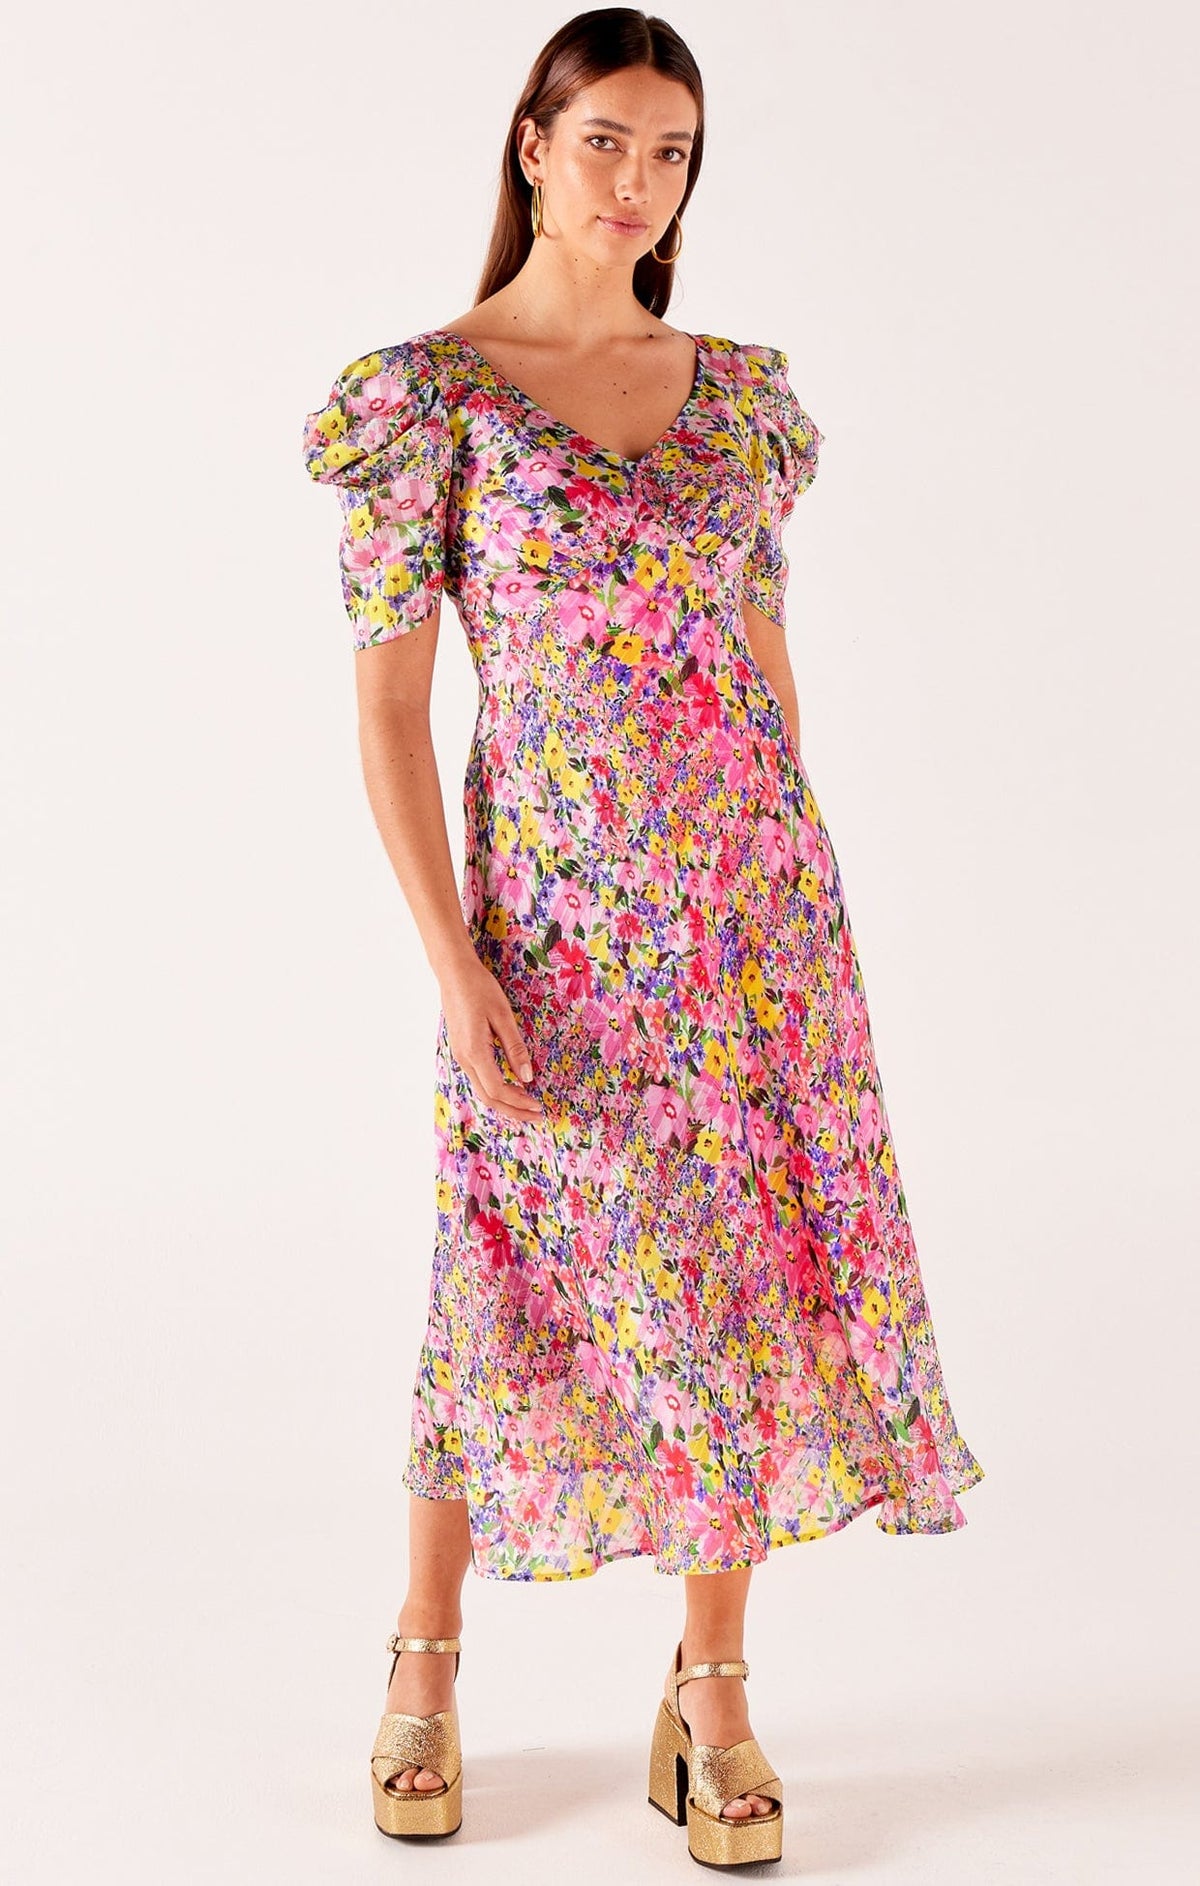 Dresses Events NEW BLOOMS MIDI IN PINK MULTI FLORAL